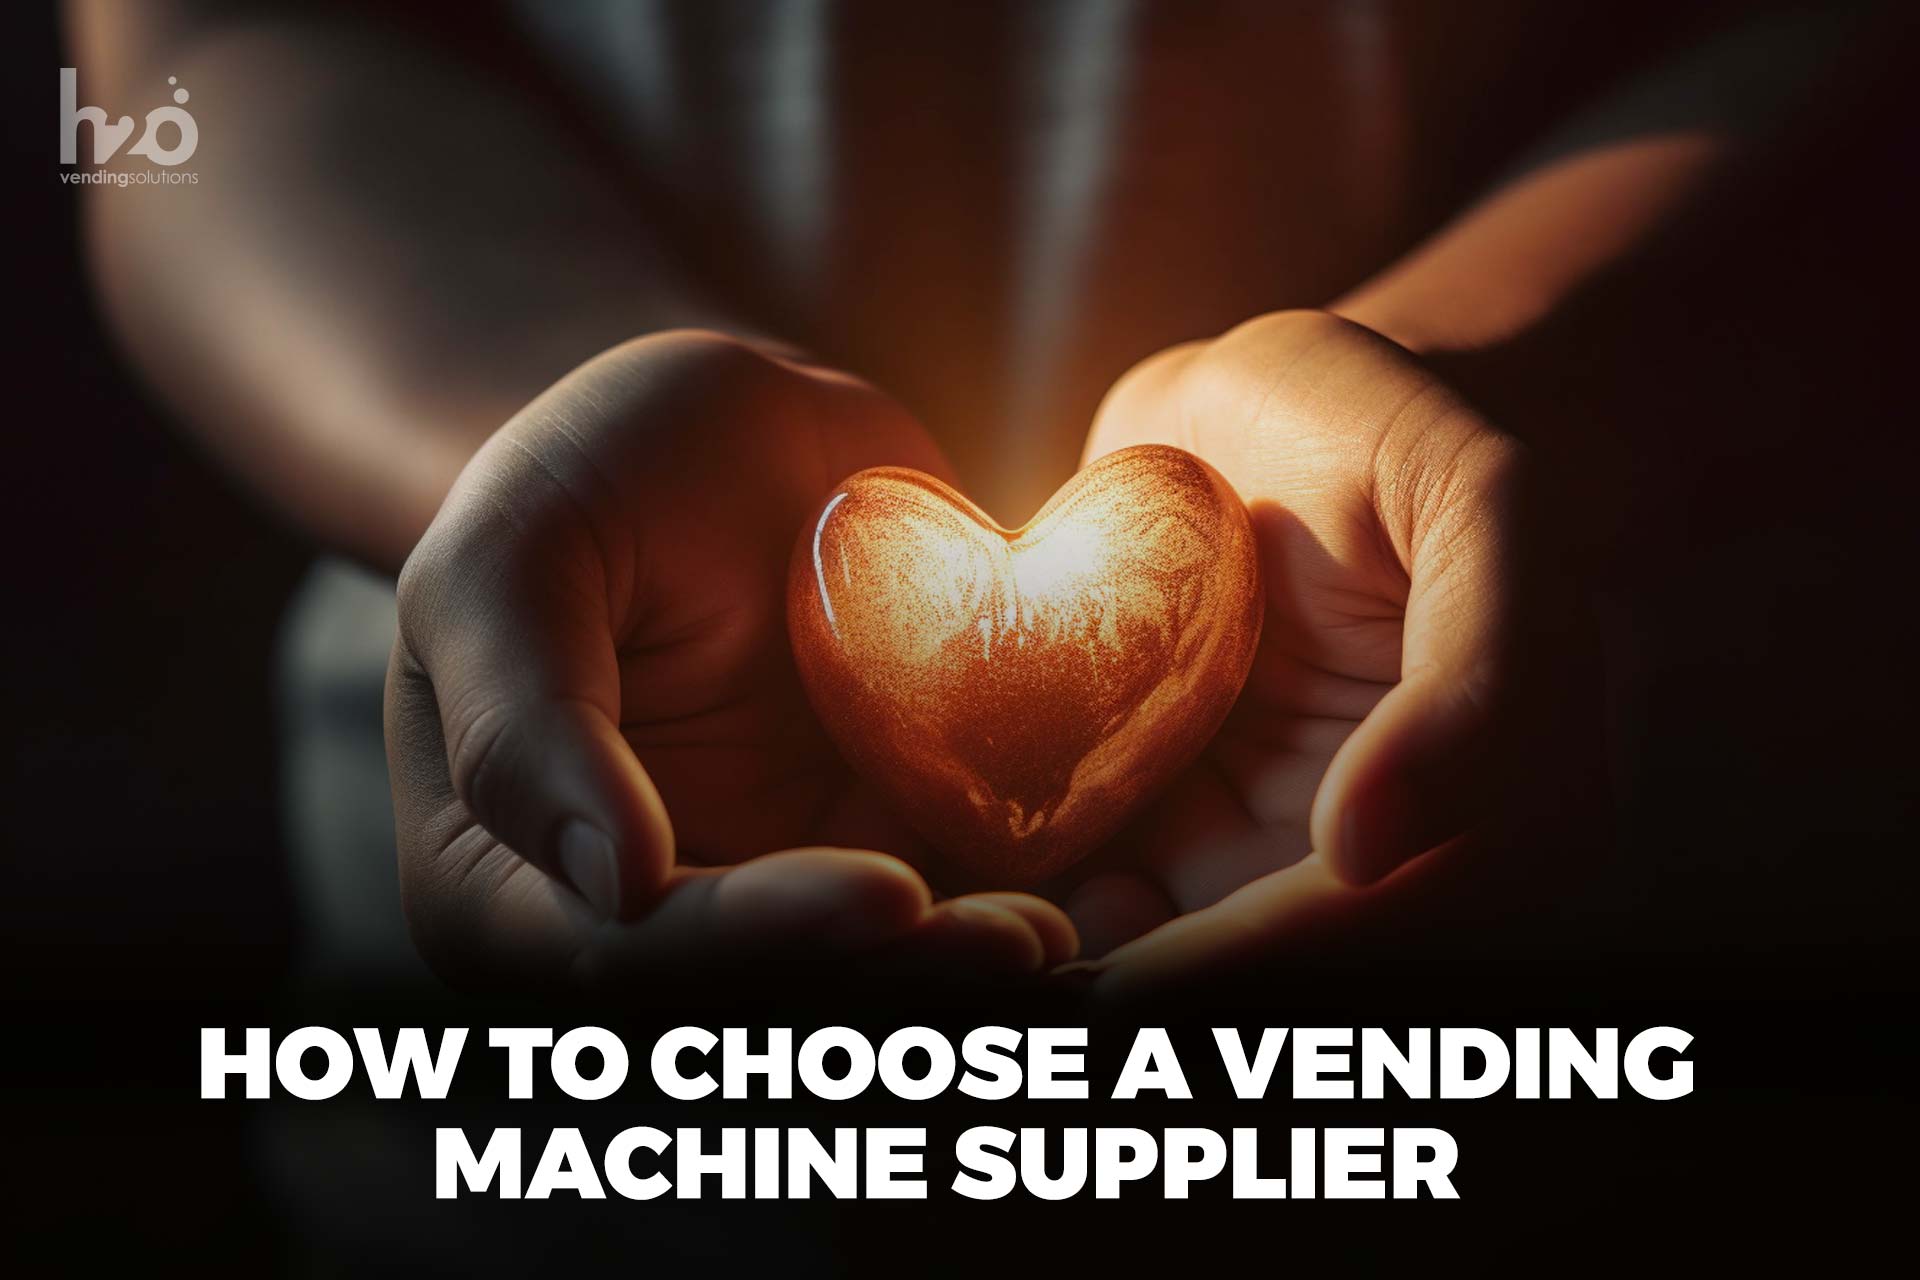 How to choose a vending machine supplier